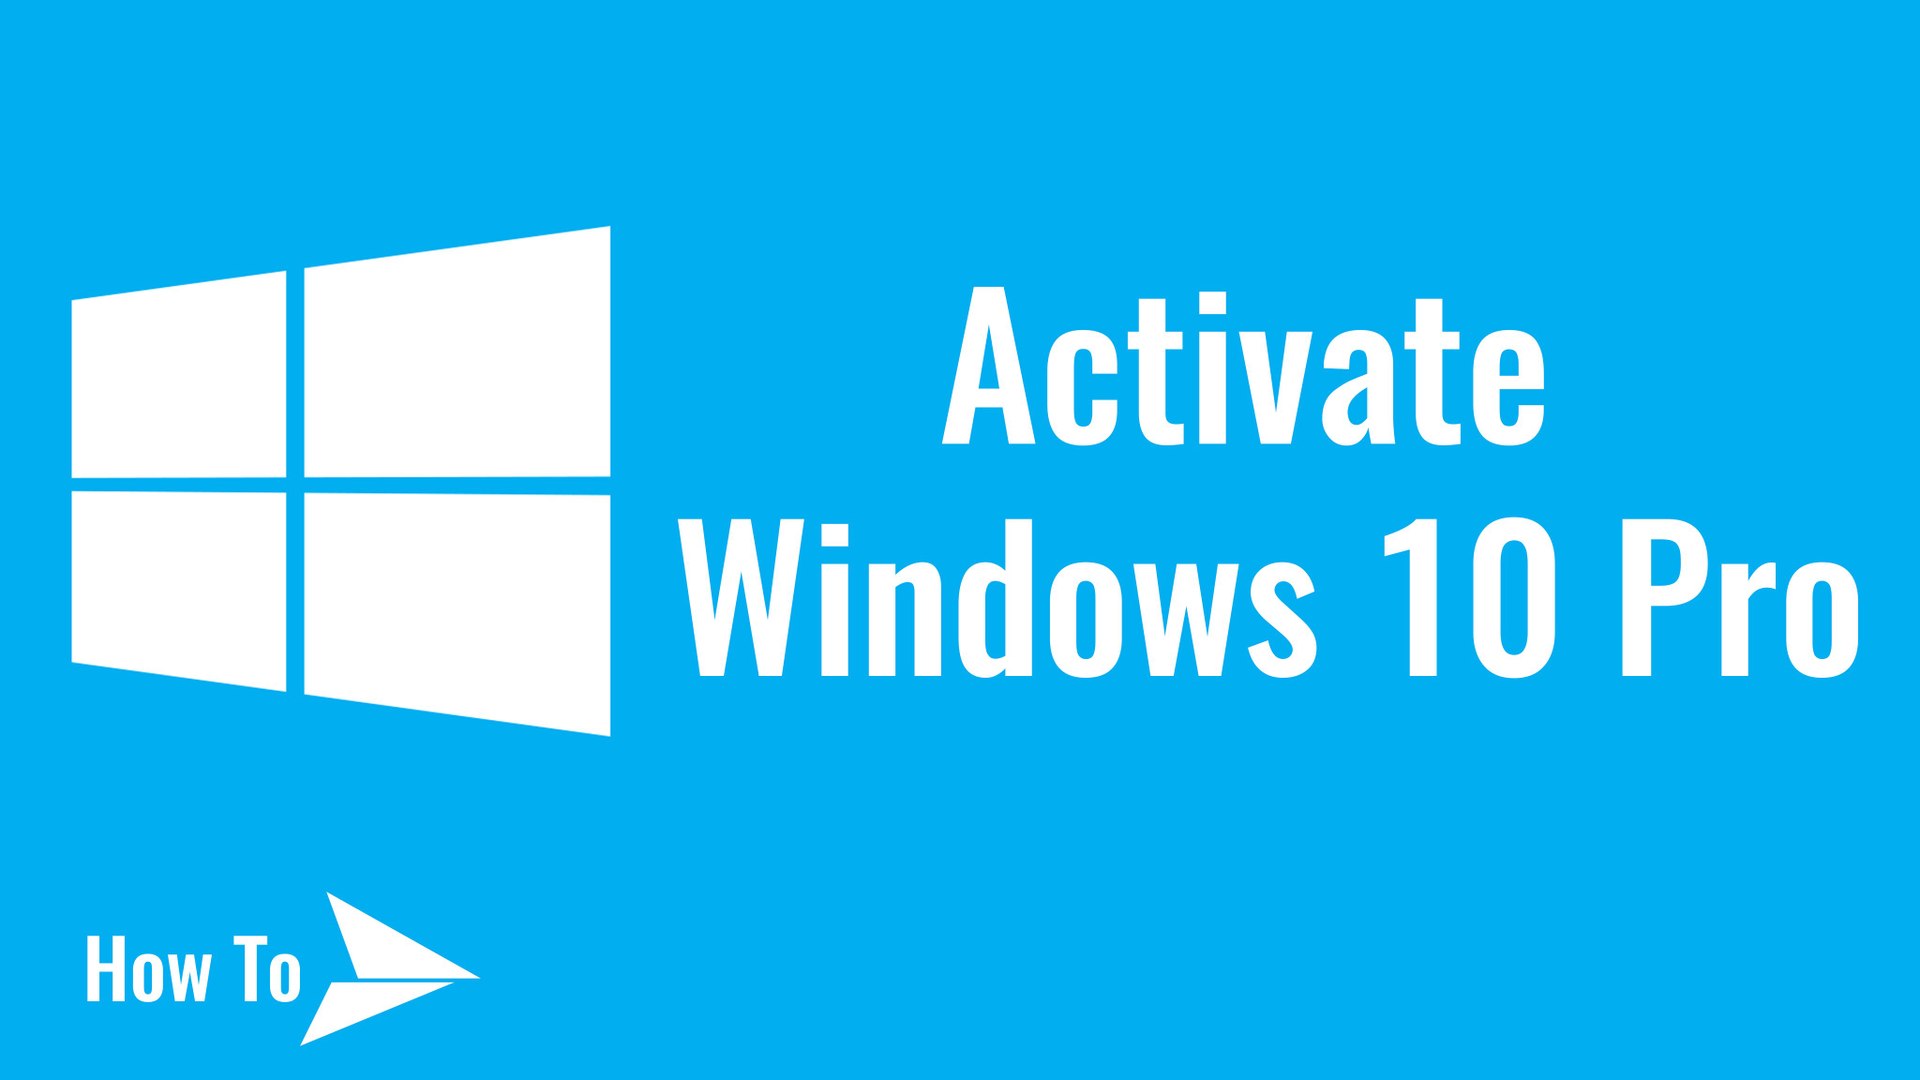 product key to activate windows 10 pro 2015